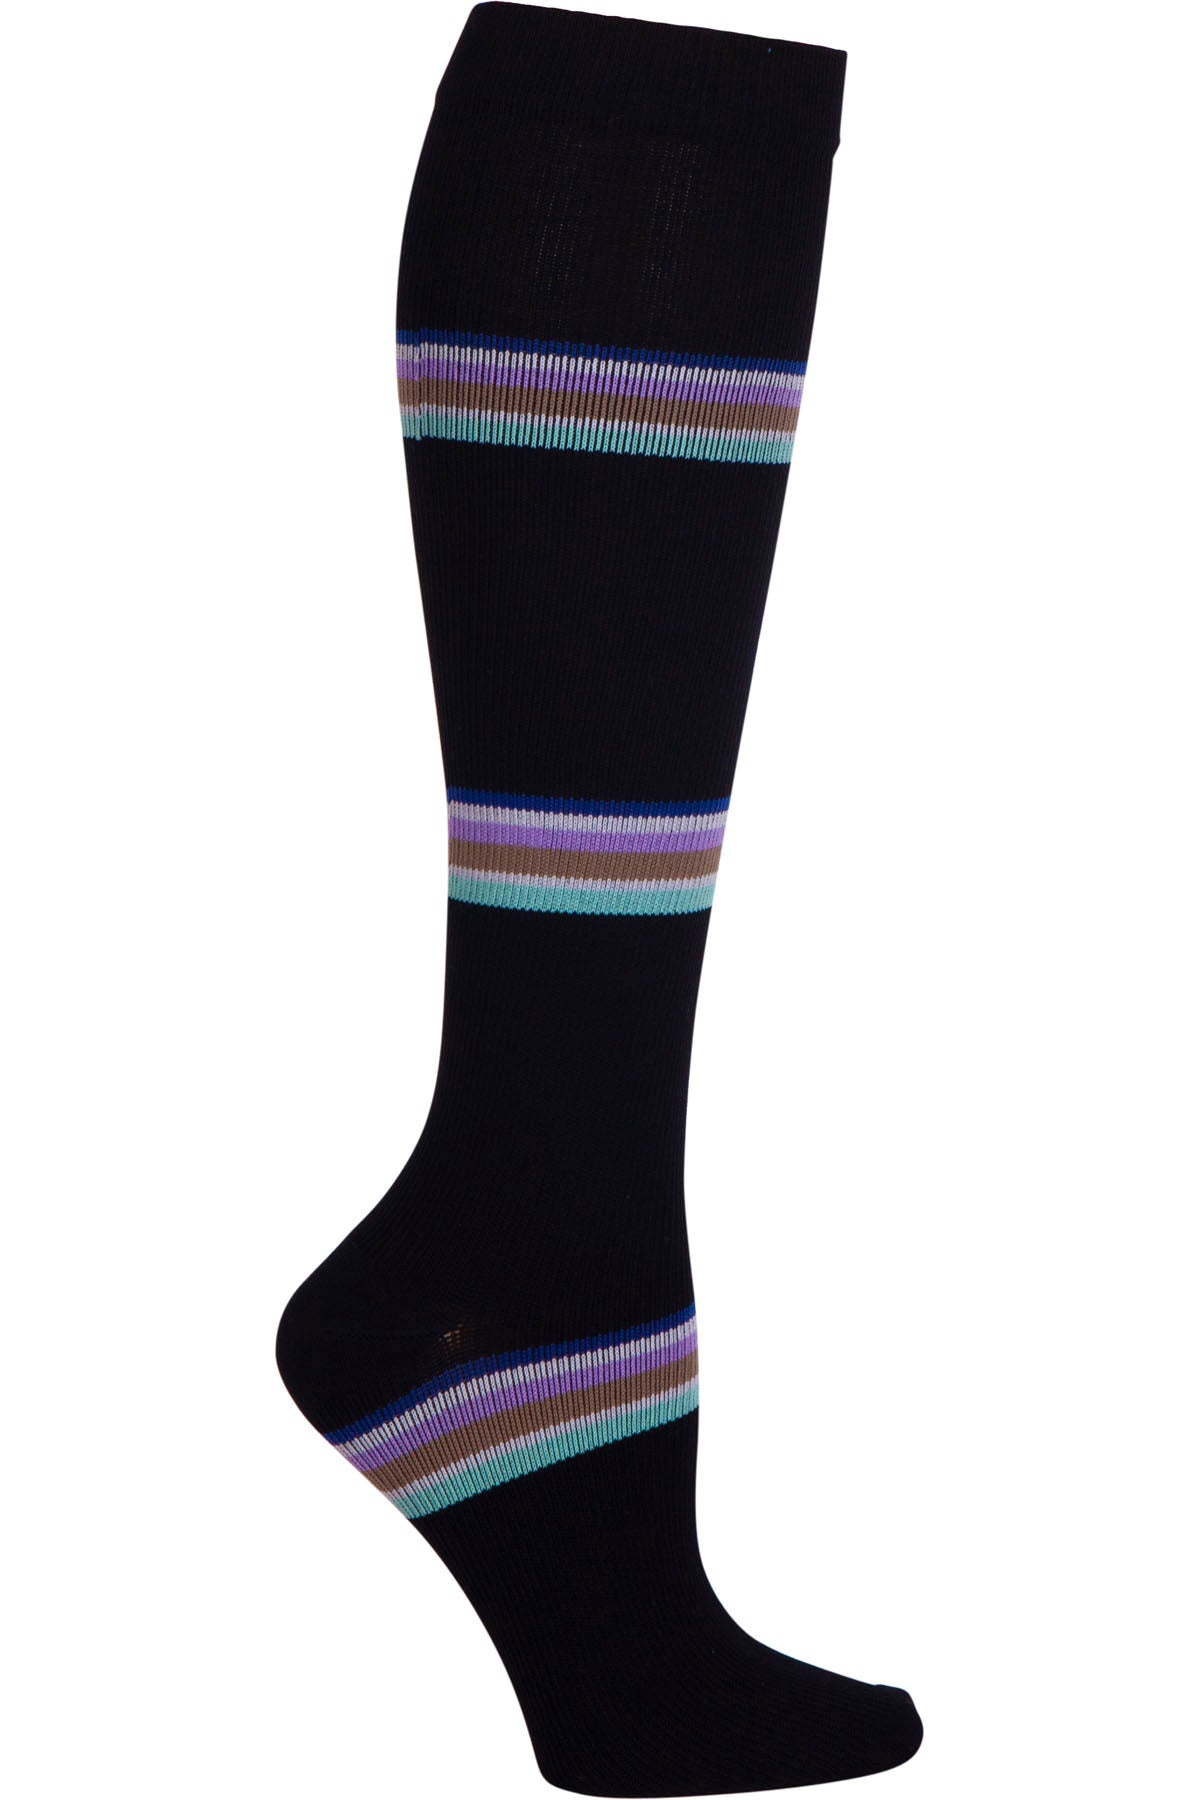 Cherokee Mens Mild Compression Socks 8-12 mmHg in Handsome Stripes at Parker's Clothing and Shoes.